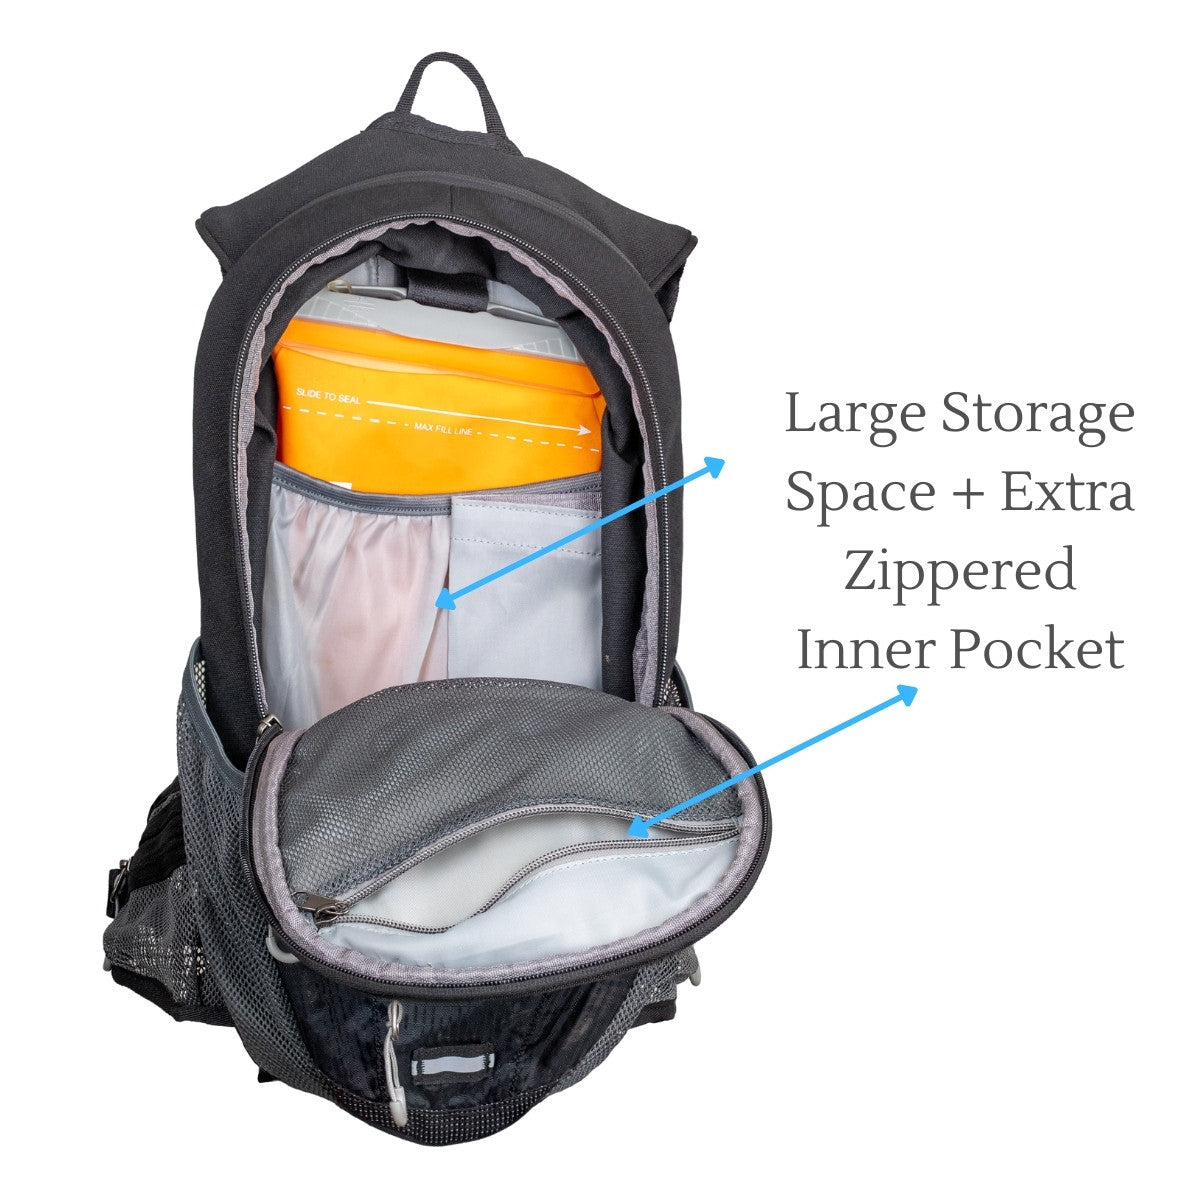 Hydration Reservoir - 2L + Stealth Hydration Backpack - 8L 2